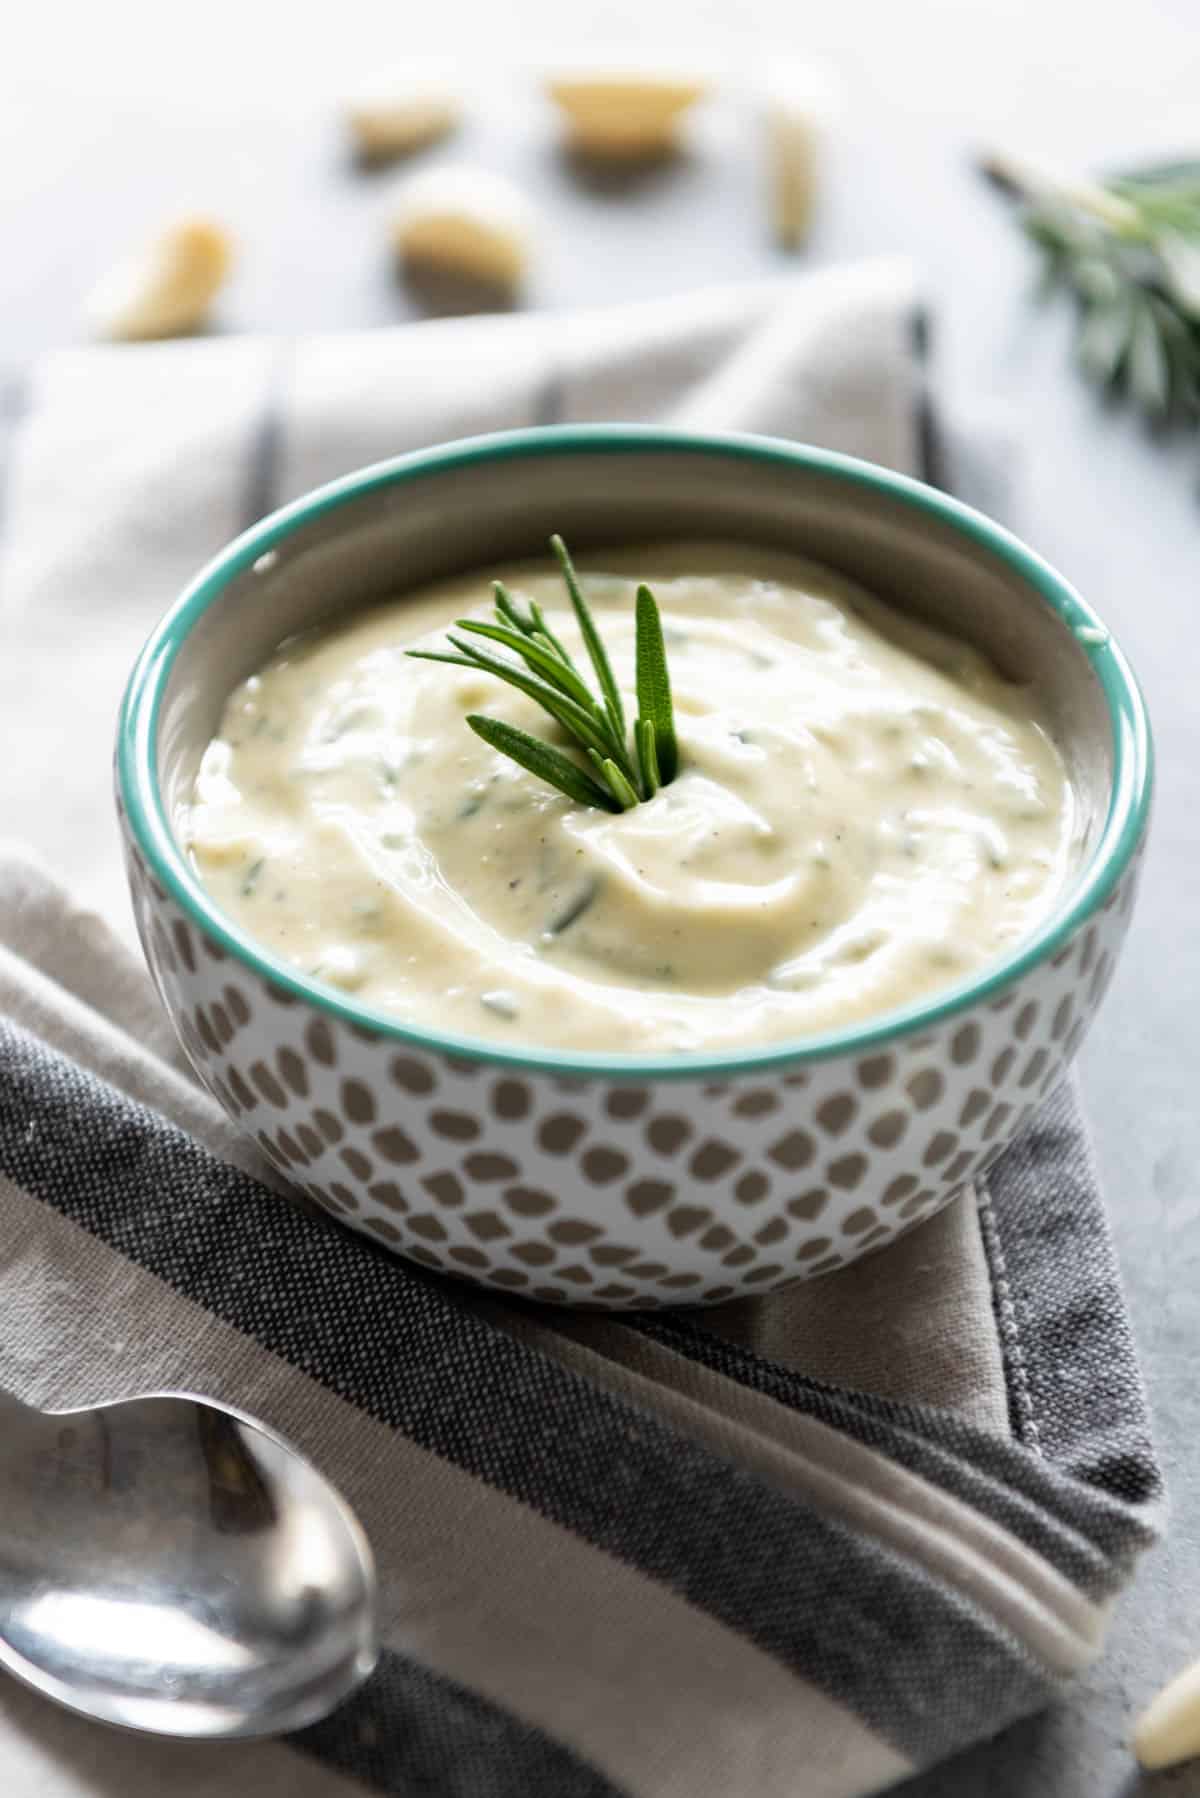 A bowl of garlic and rosemary aioli on a gray and white striped towel with a spoon and garnished with fresh rosemary.